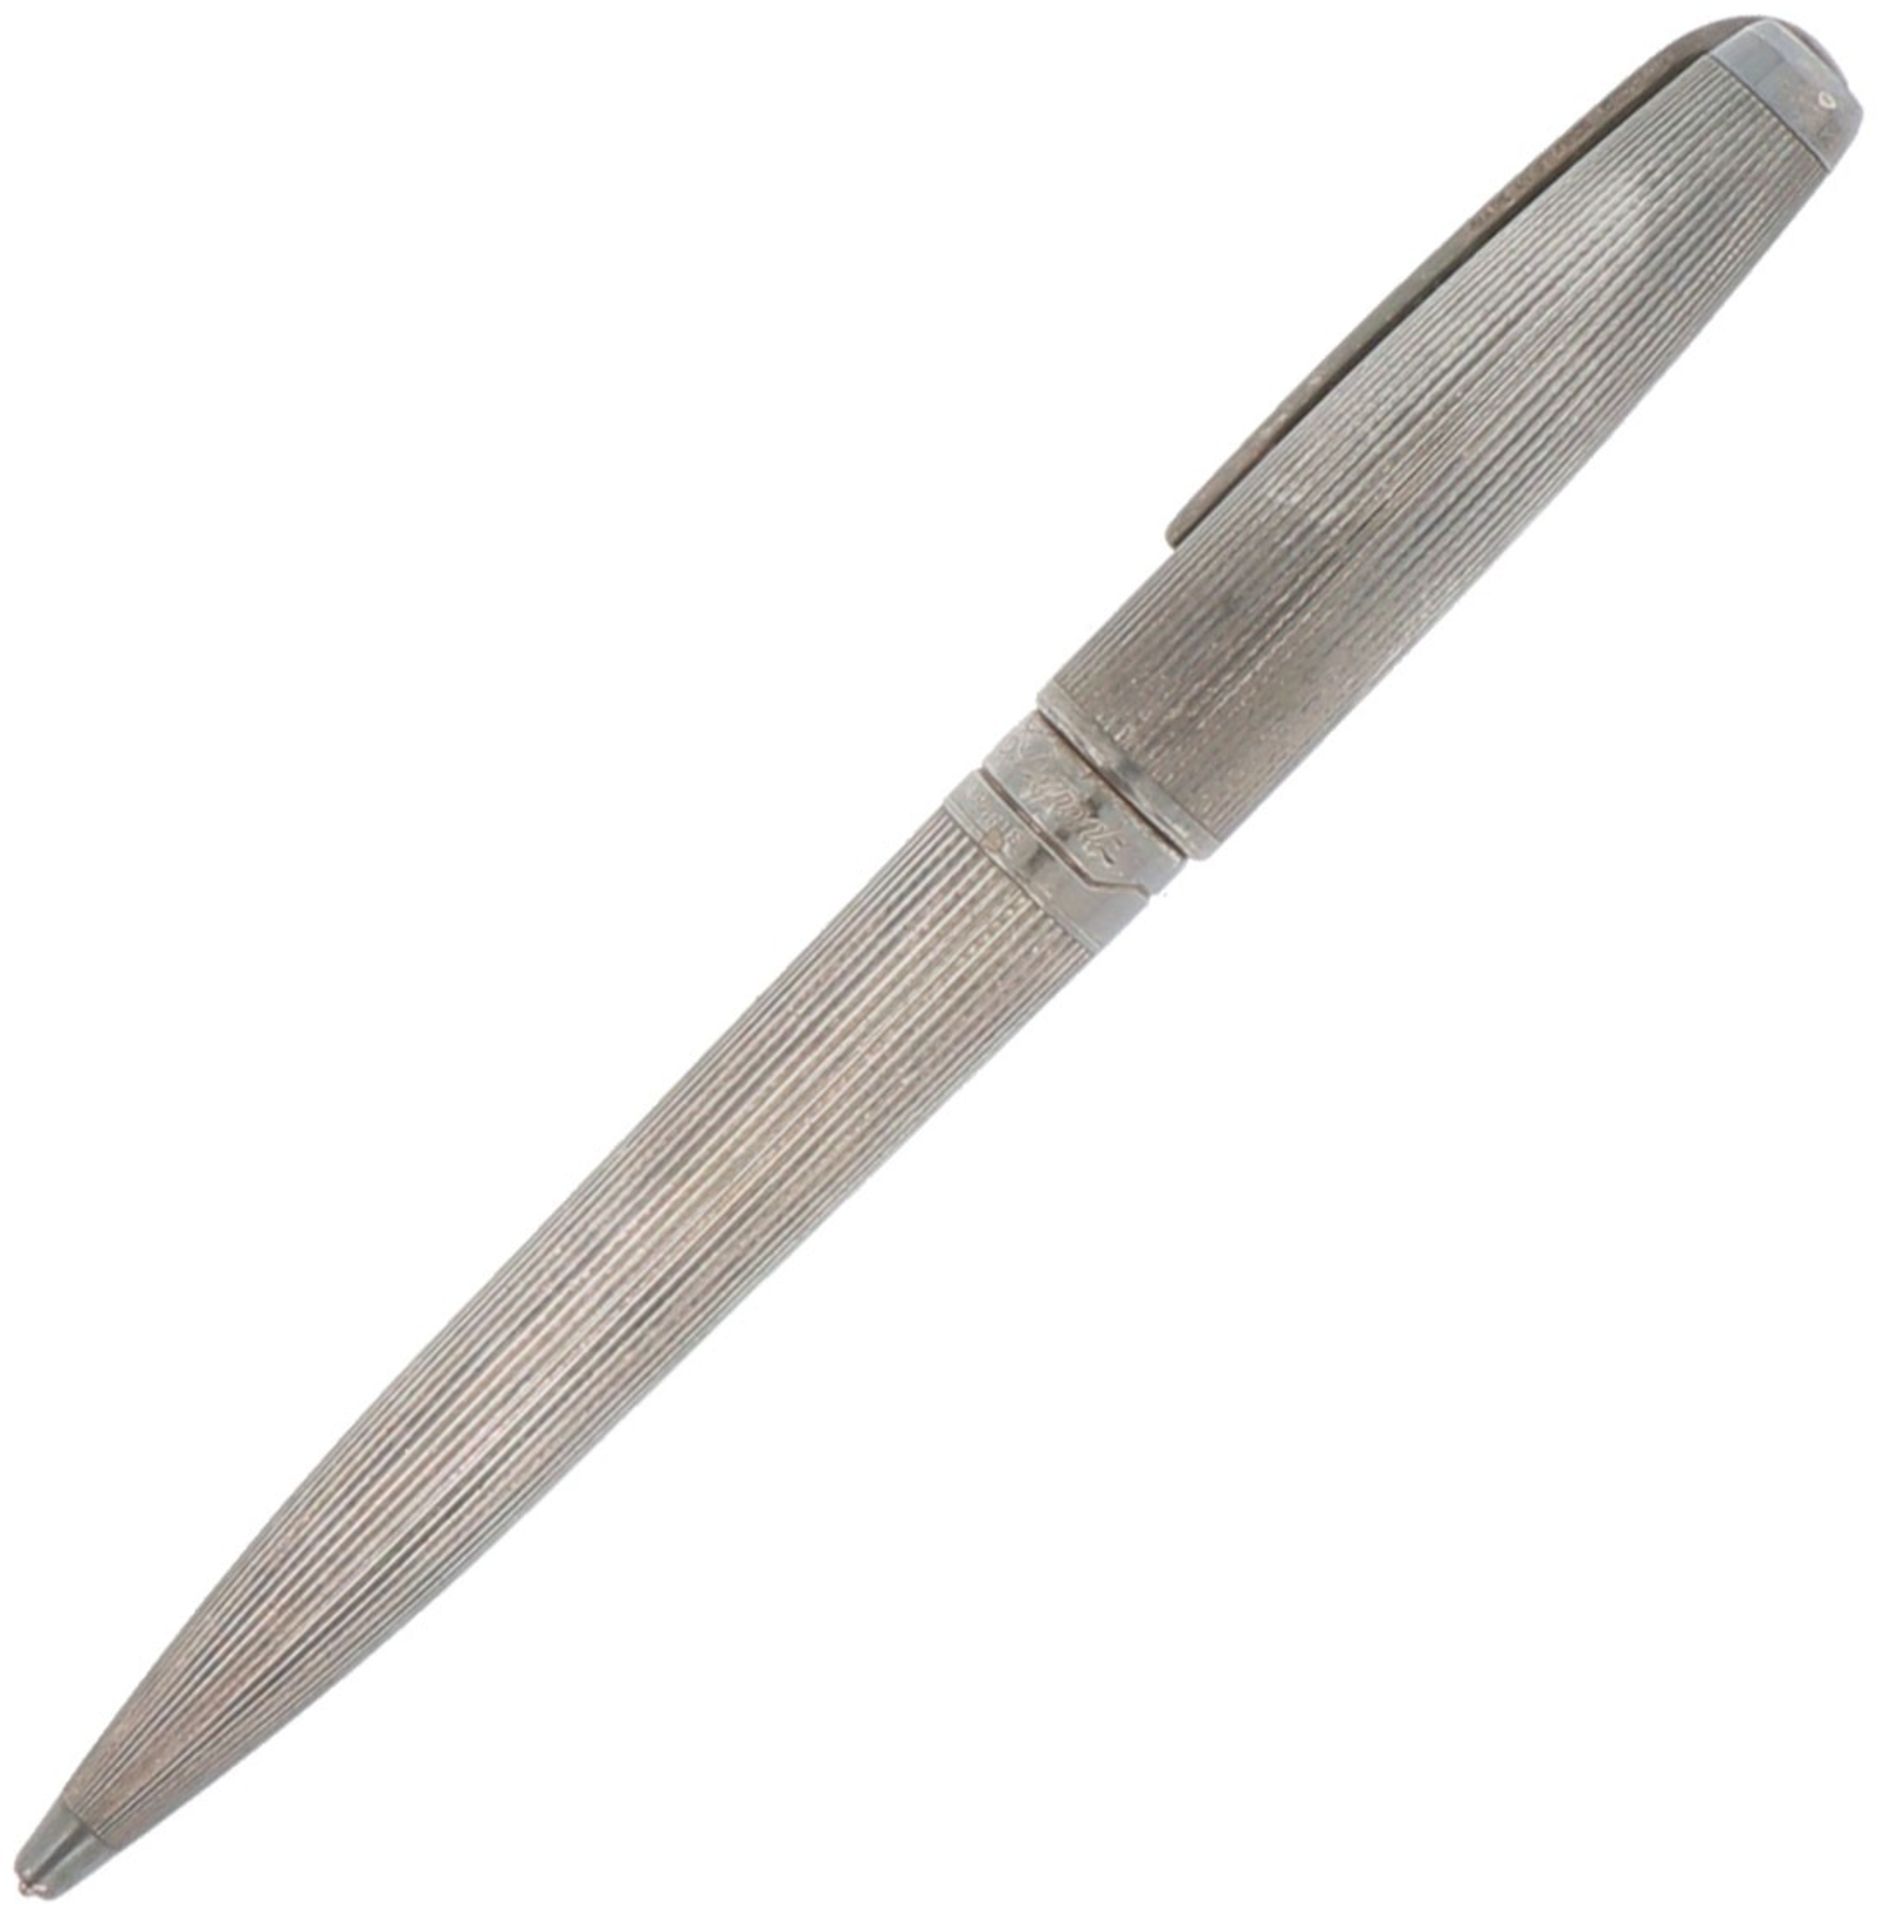 ST. Dupont ballpoint pen silver-plated.